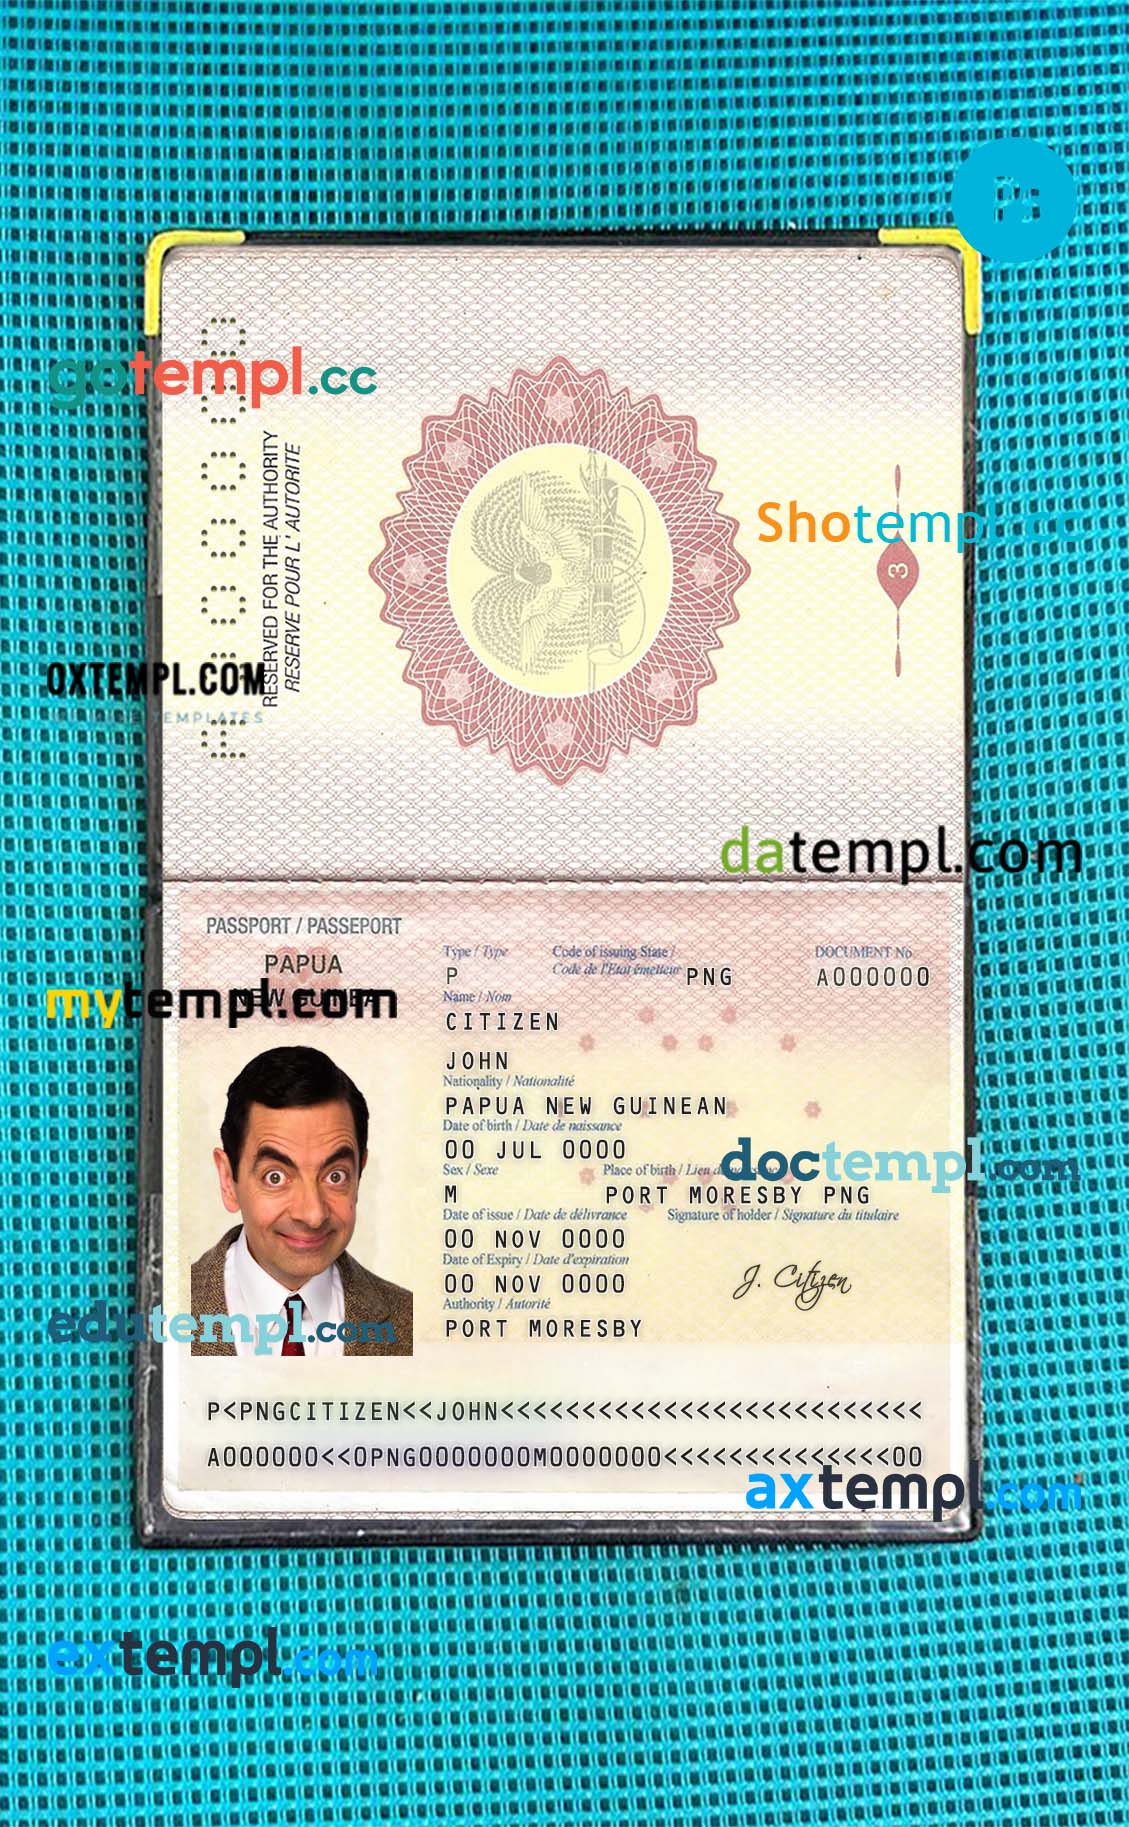 Papua New Guinea passport editable PSD files, scan and photo taken image, 2 in 1